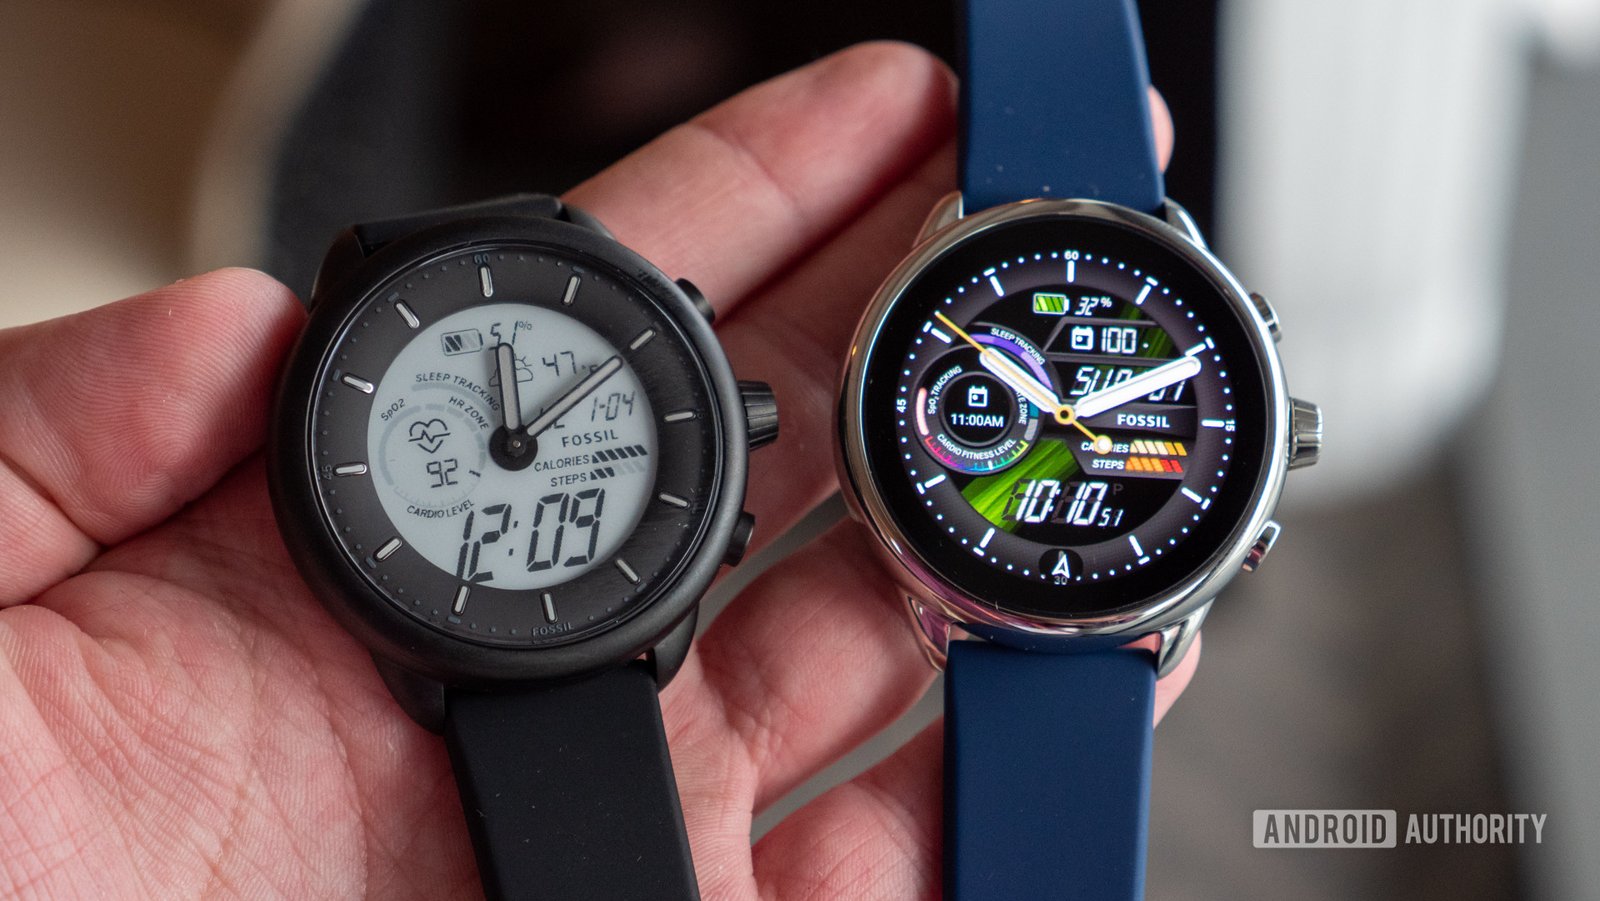 Fossil exits Wear OS market with no more smartwatches on sale